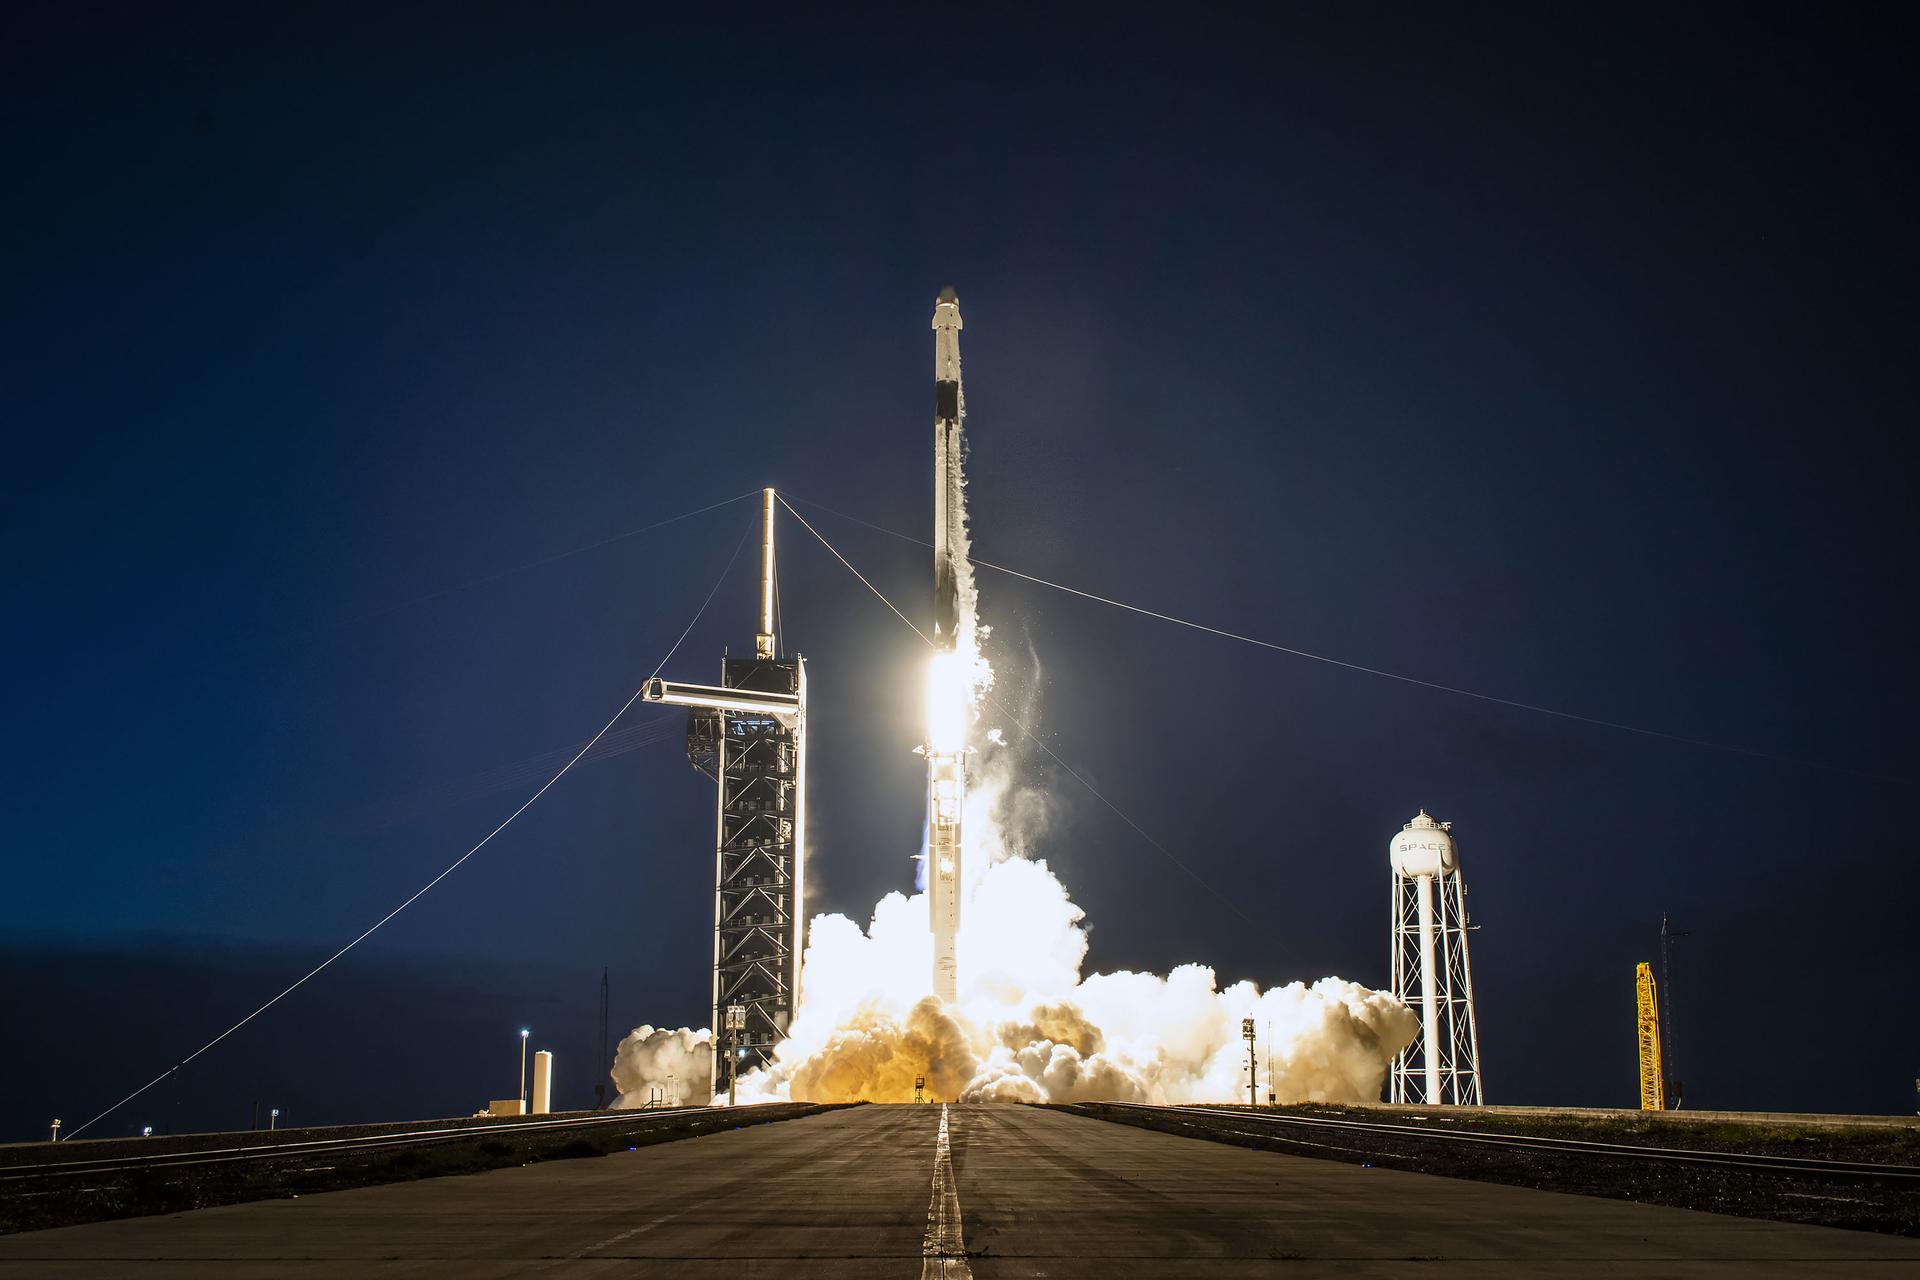 The SpaceX Falcon 9 rocket carrying the Dragon capsule lifts off from Launch Complex 39A at NASA’s Kennedy Space Center in Florida July 14, 2022, on the company’s 25th Commercial Resupply Services mission for the agency to the space station.